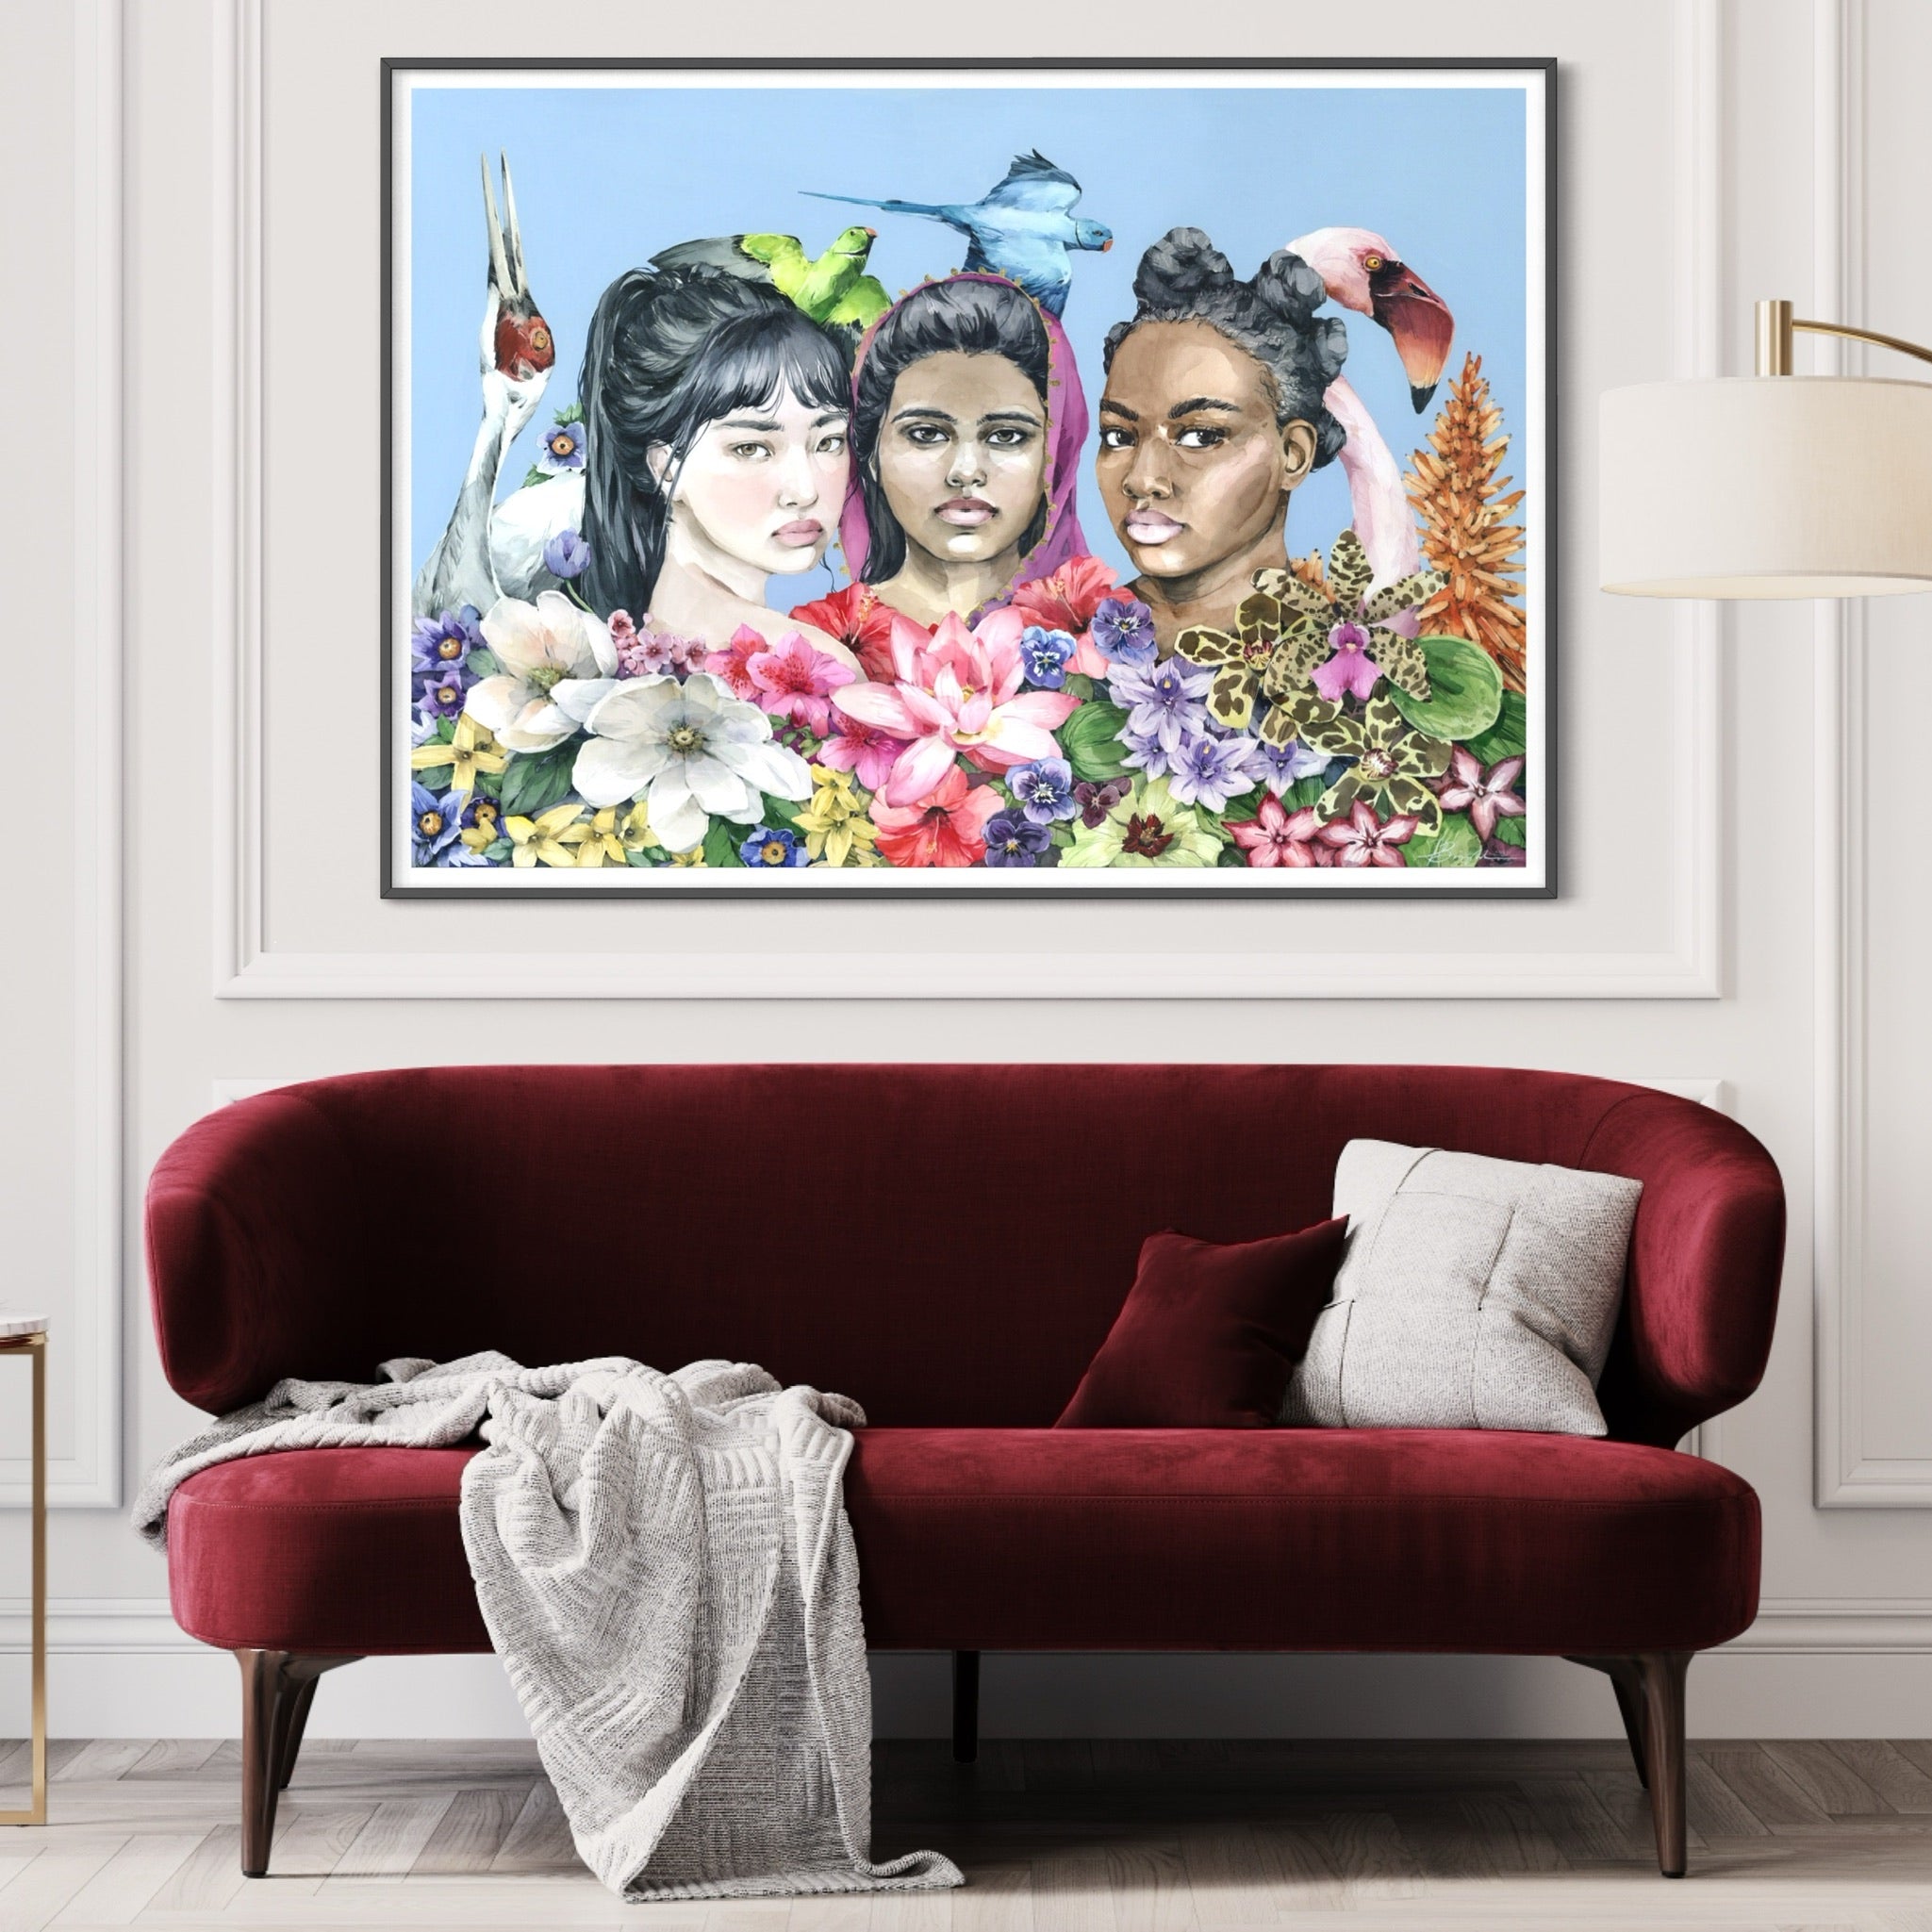 The Silent Grace Of Blooming Diversity - original painting